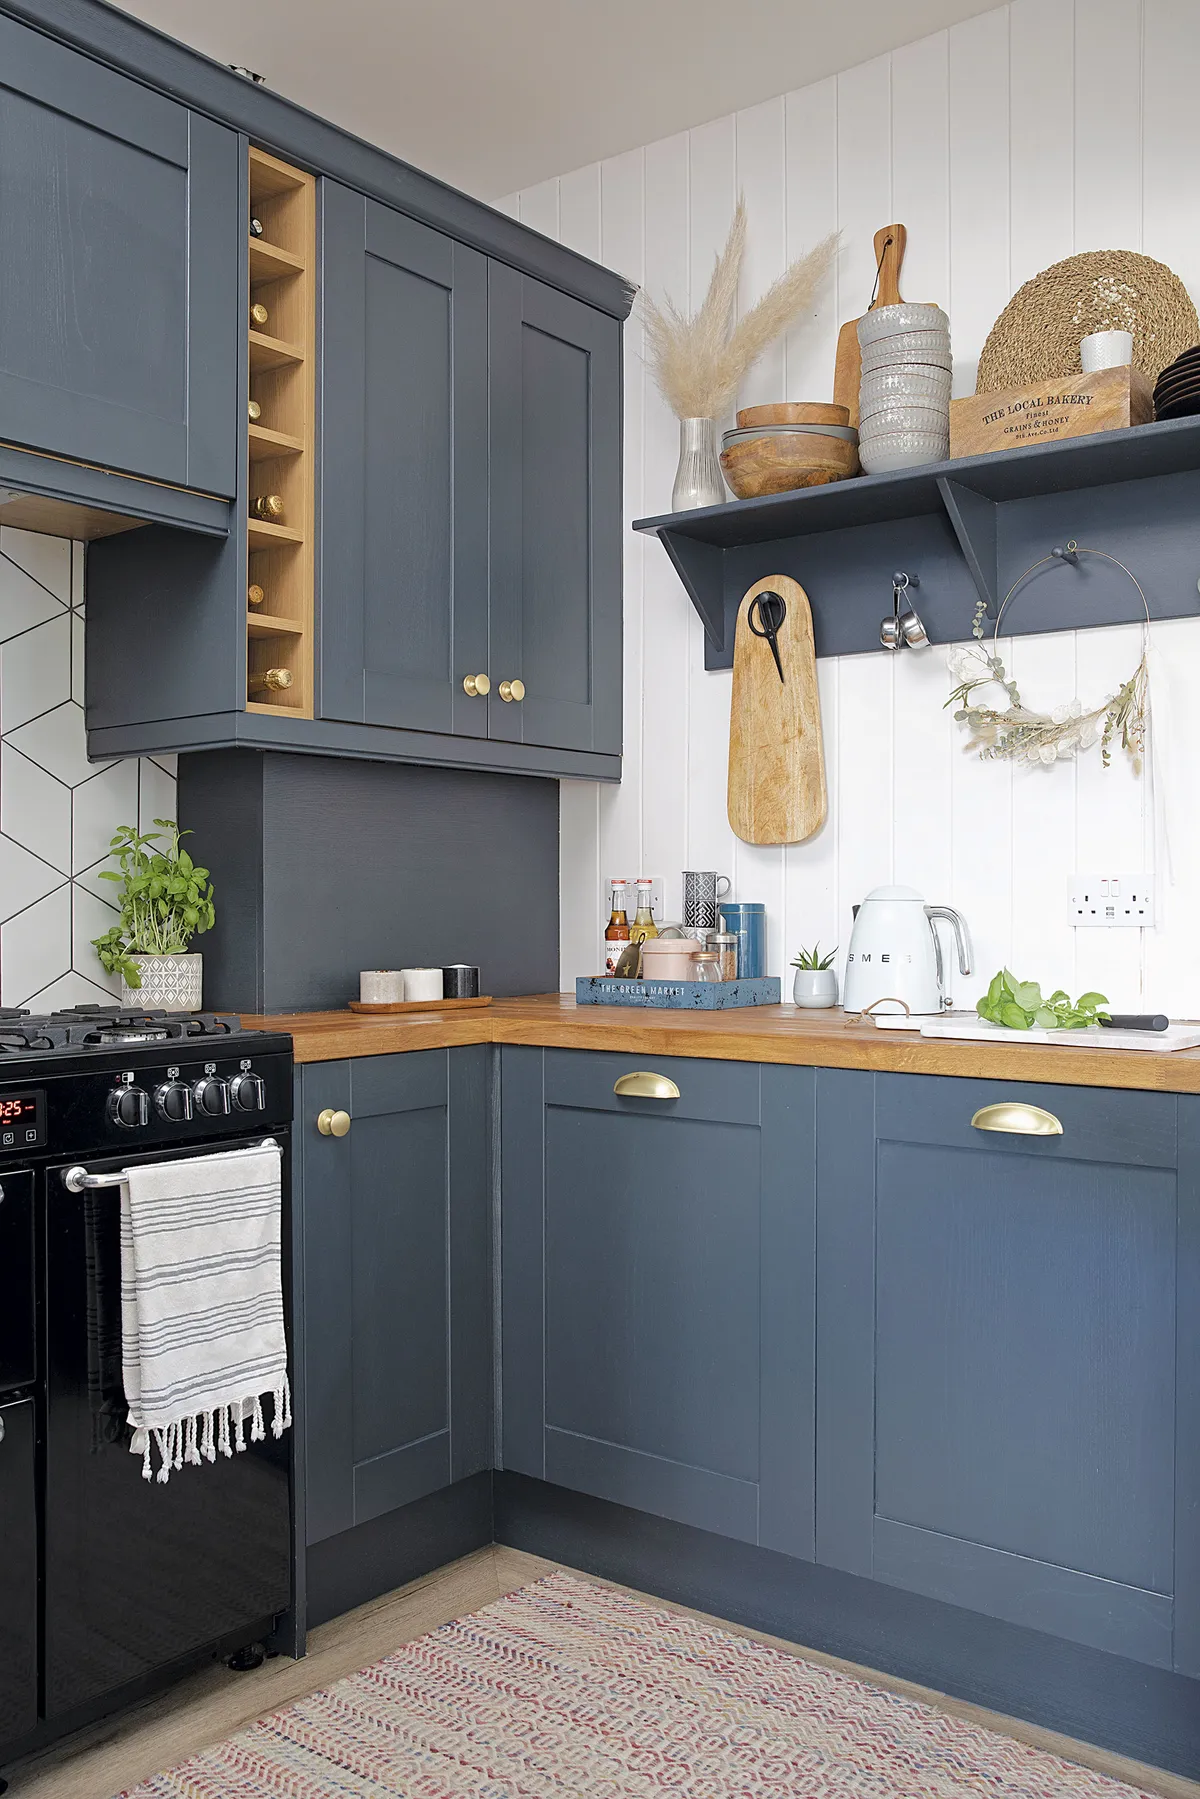 ‘Having moved here from a bigger house, we had to be clever with storage solutions so we went for taller-than-standard wall units,’ explains Laura